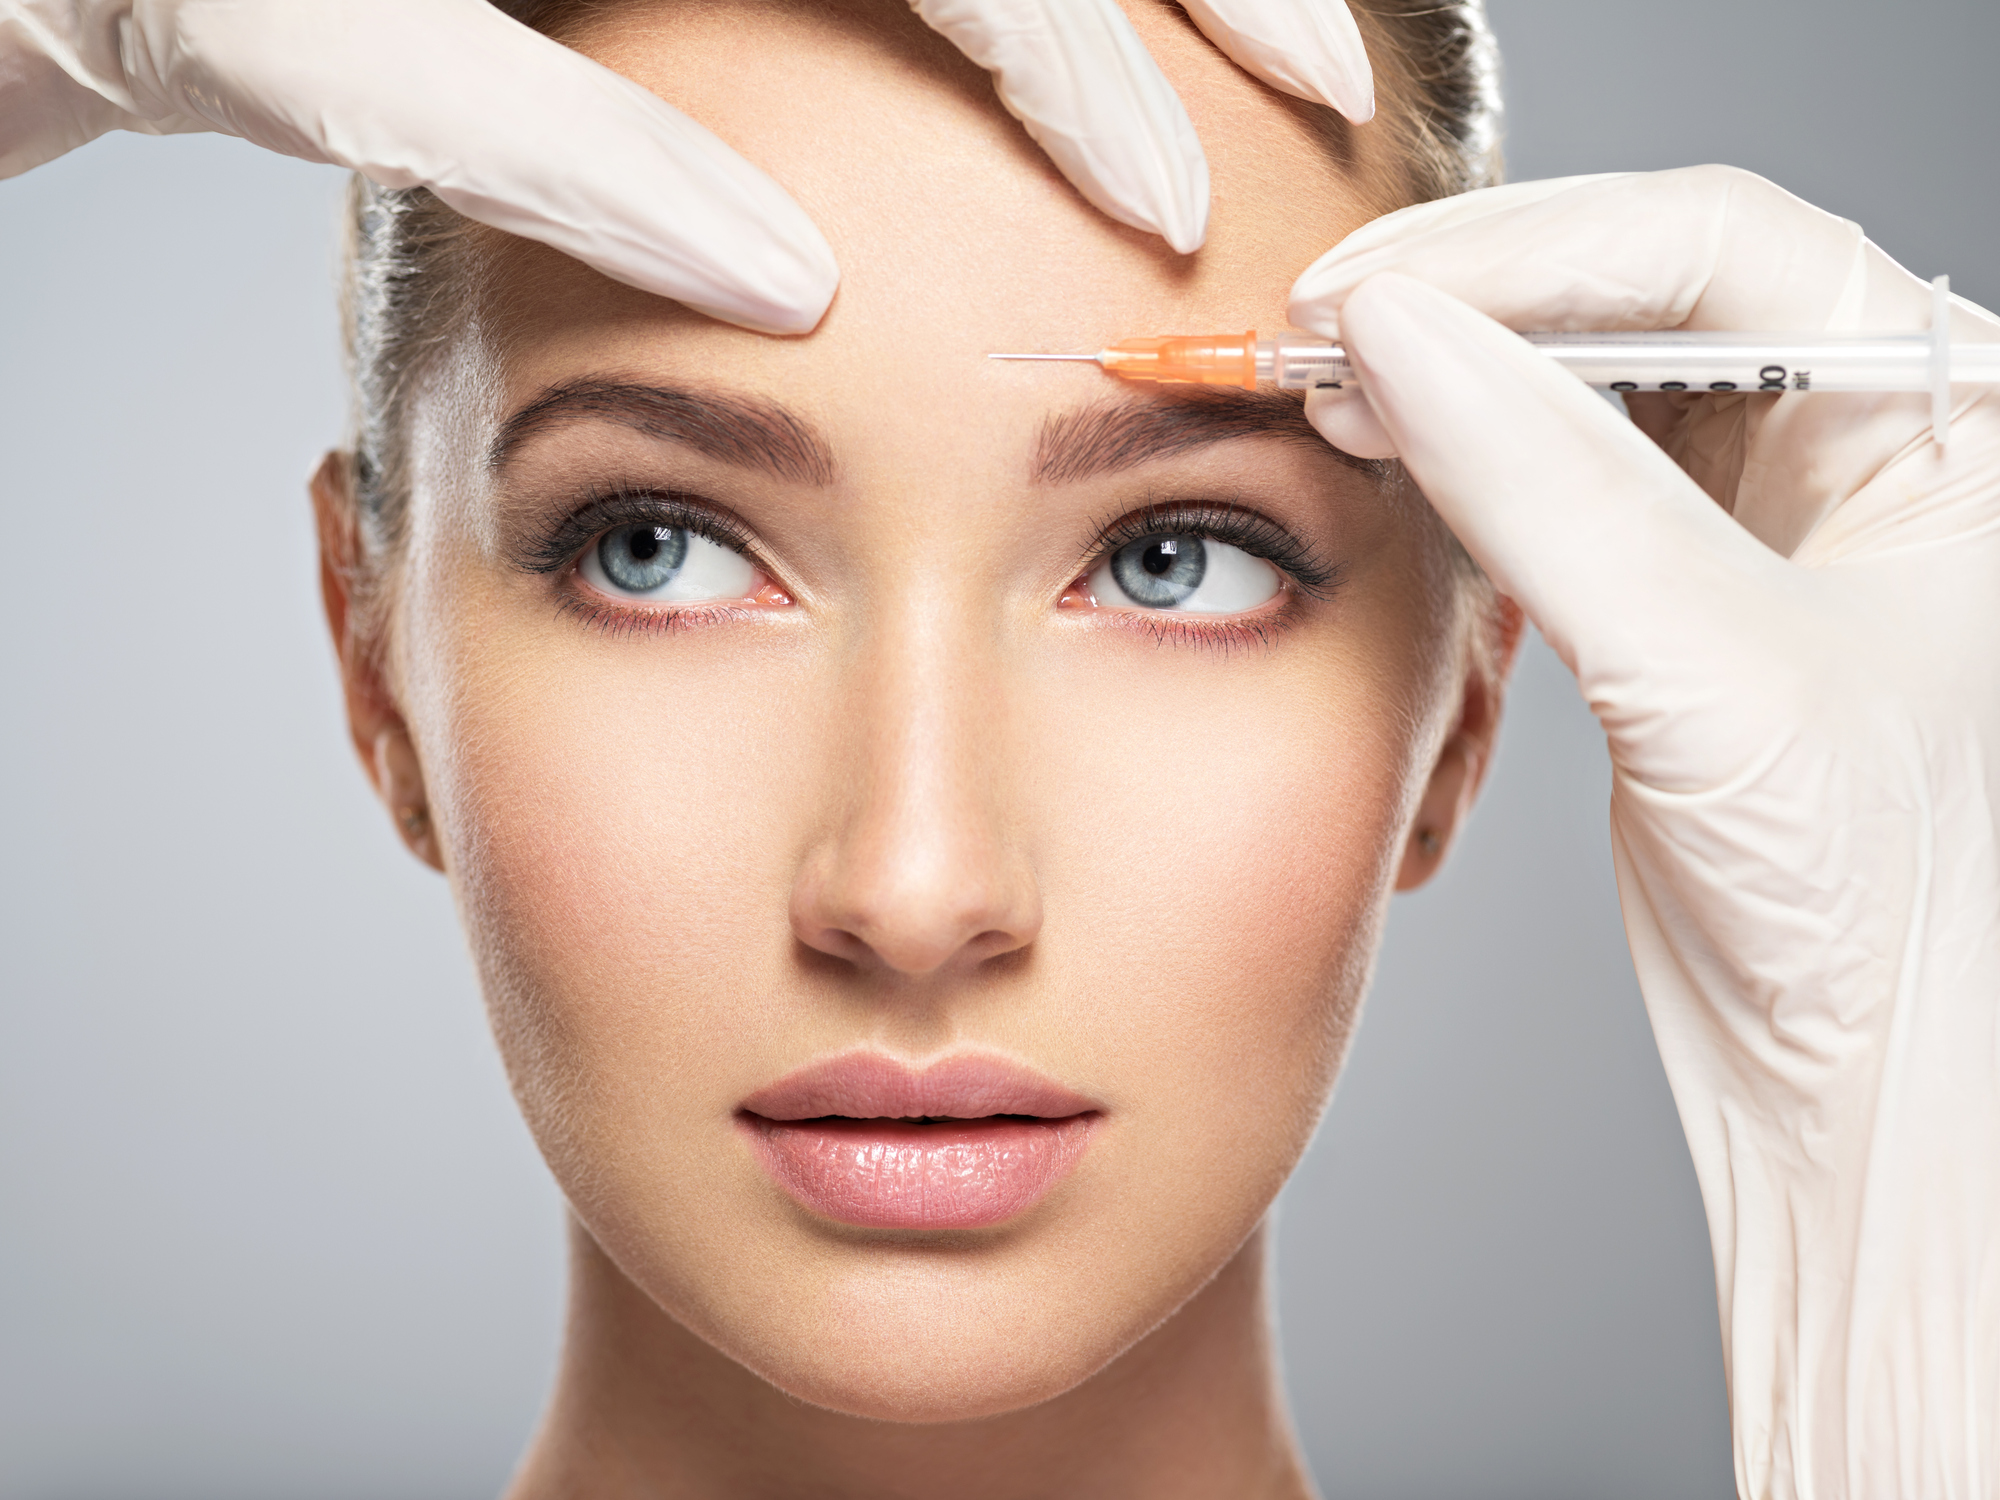 Botox® for Facial Lines and Wrinkles